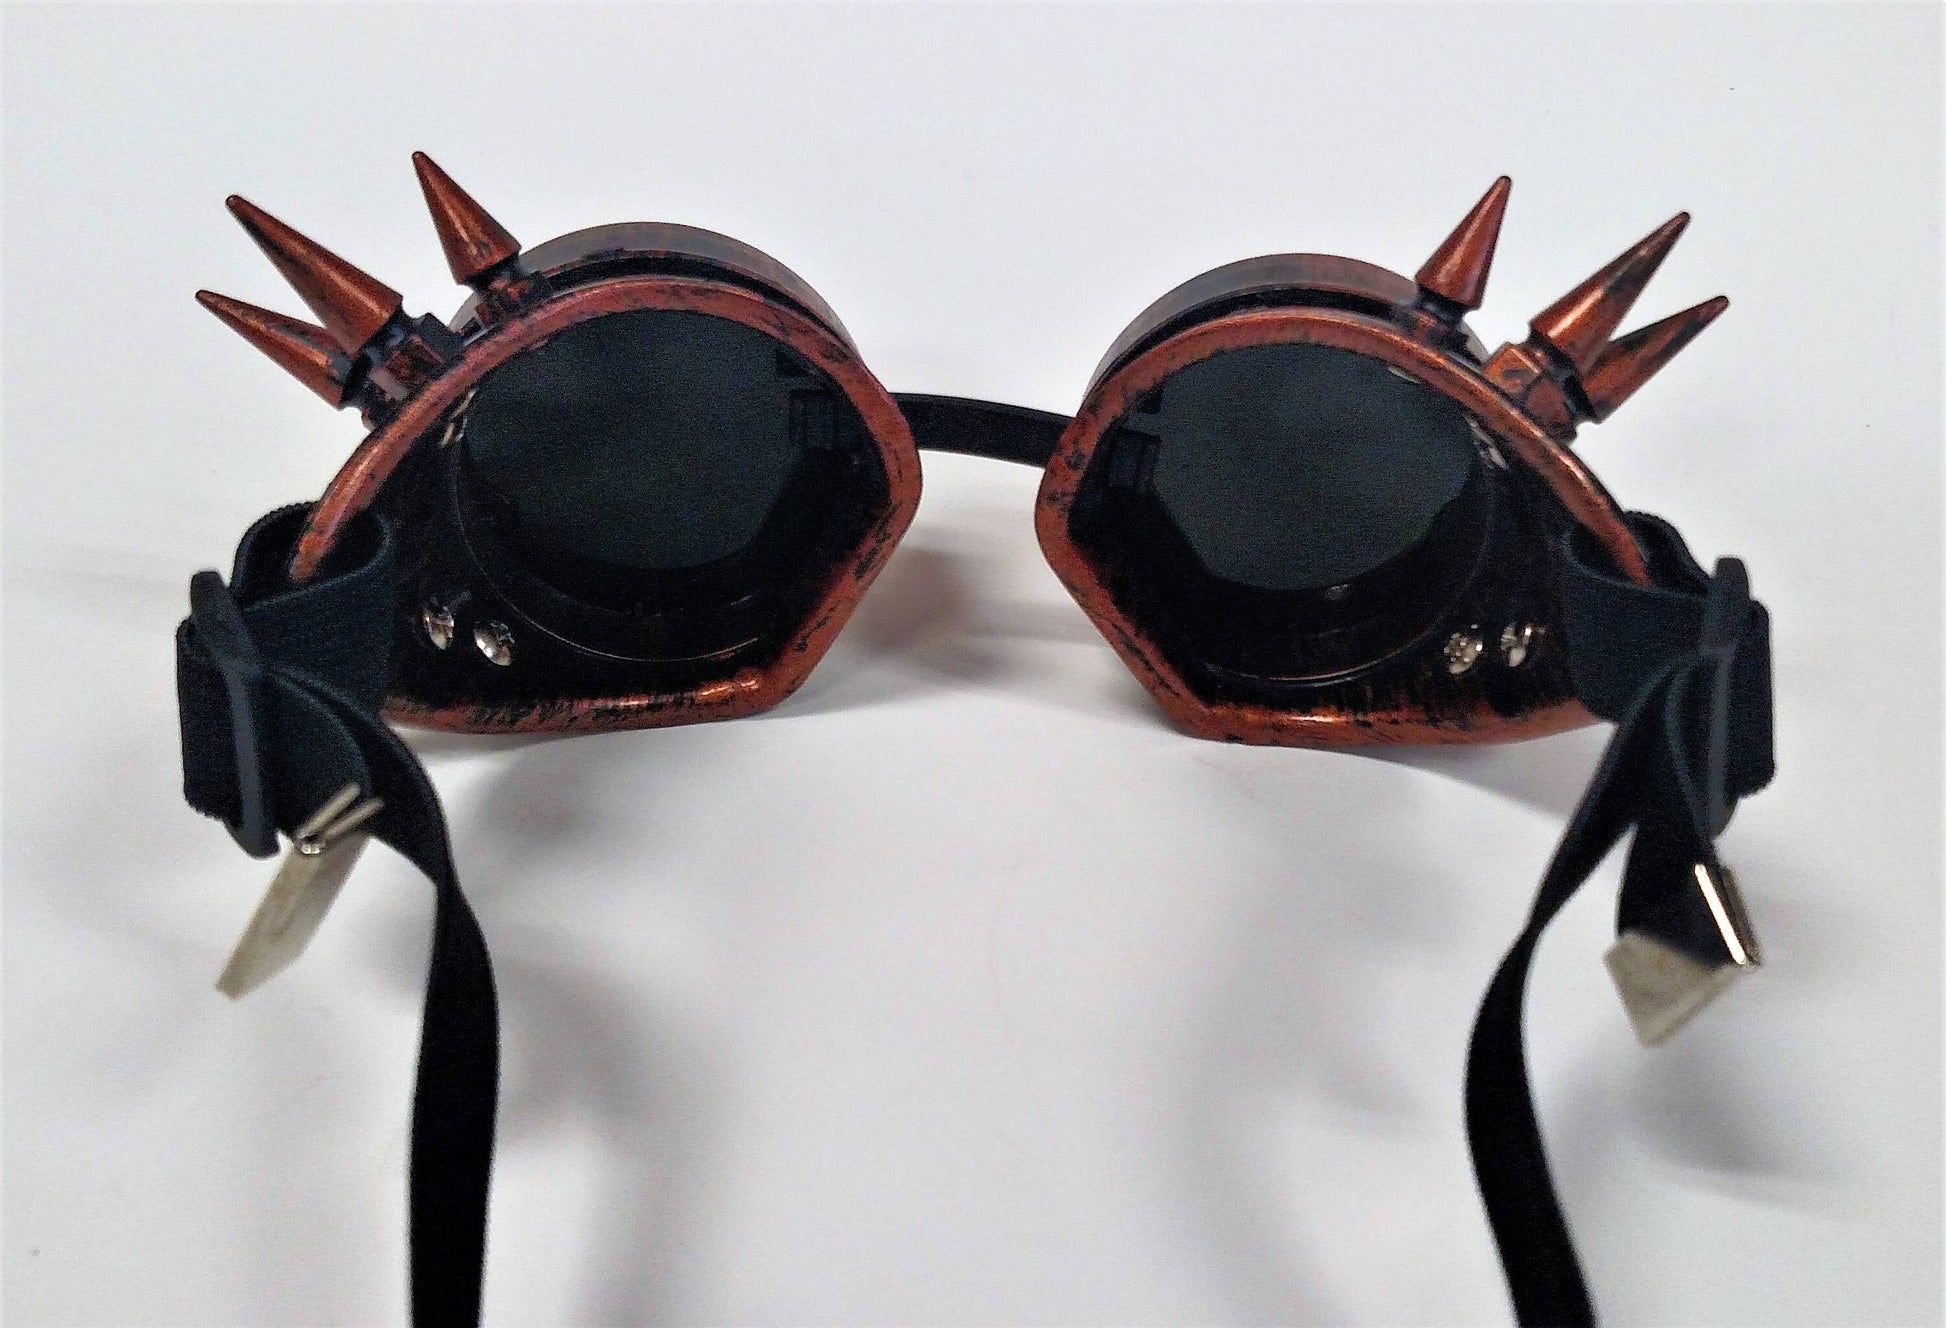 Steampunk Goggles Copper Spiked Goth Cyber Costume Accessory Party Gif –  FUNsational Finds